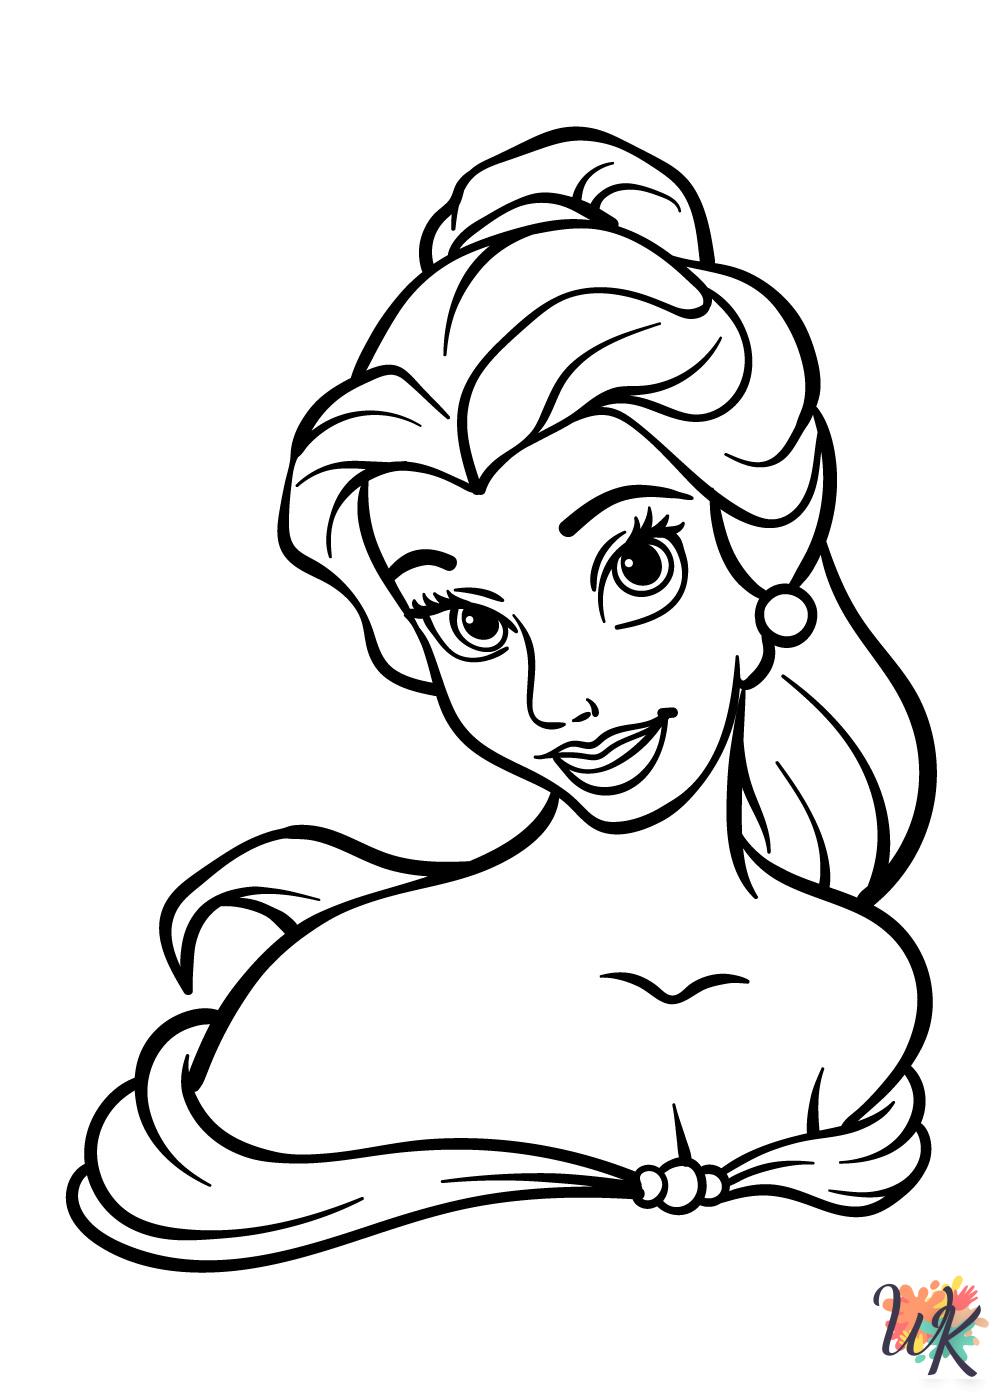 Belle coloring pages for kids